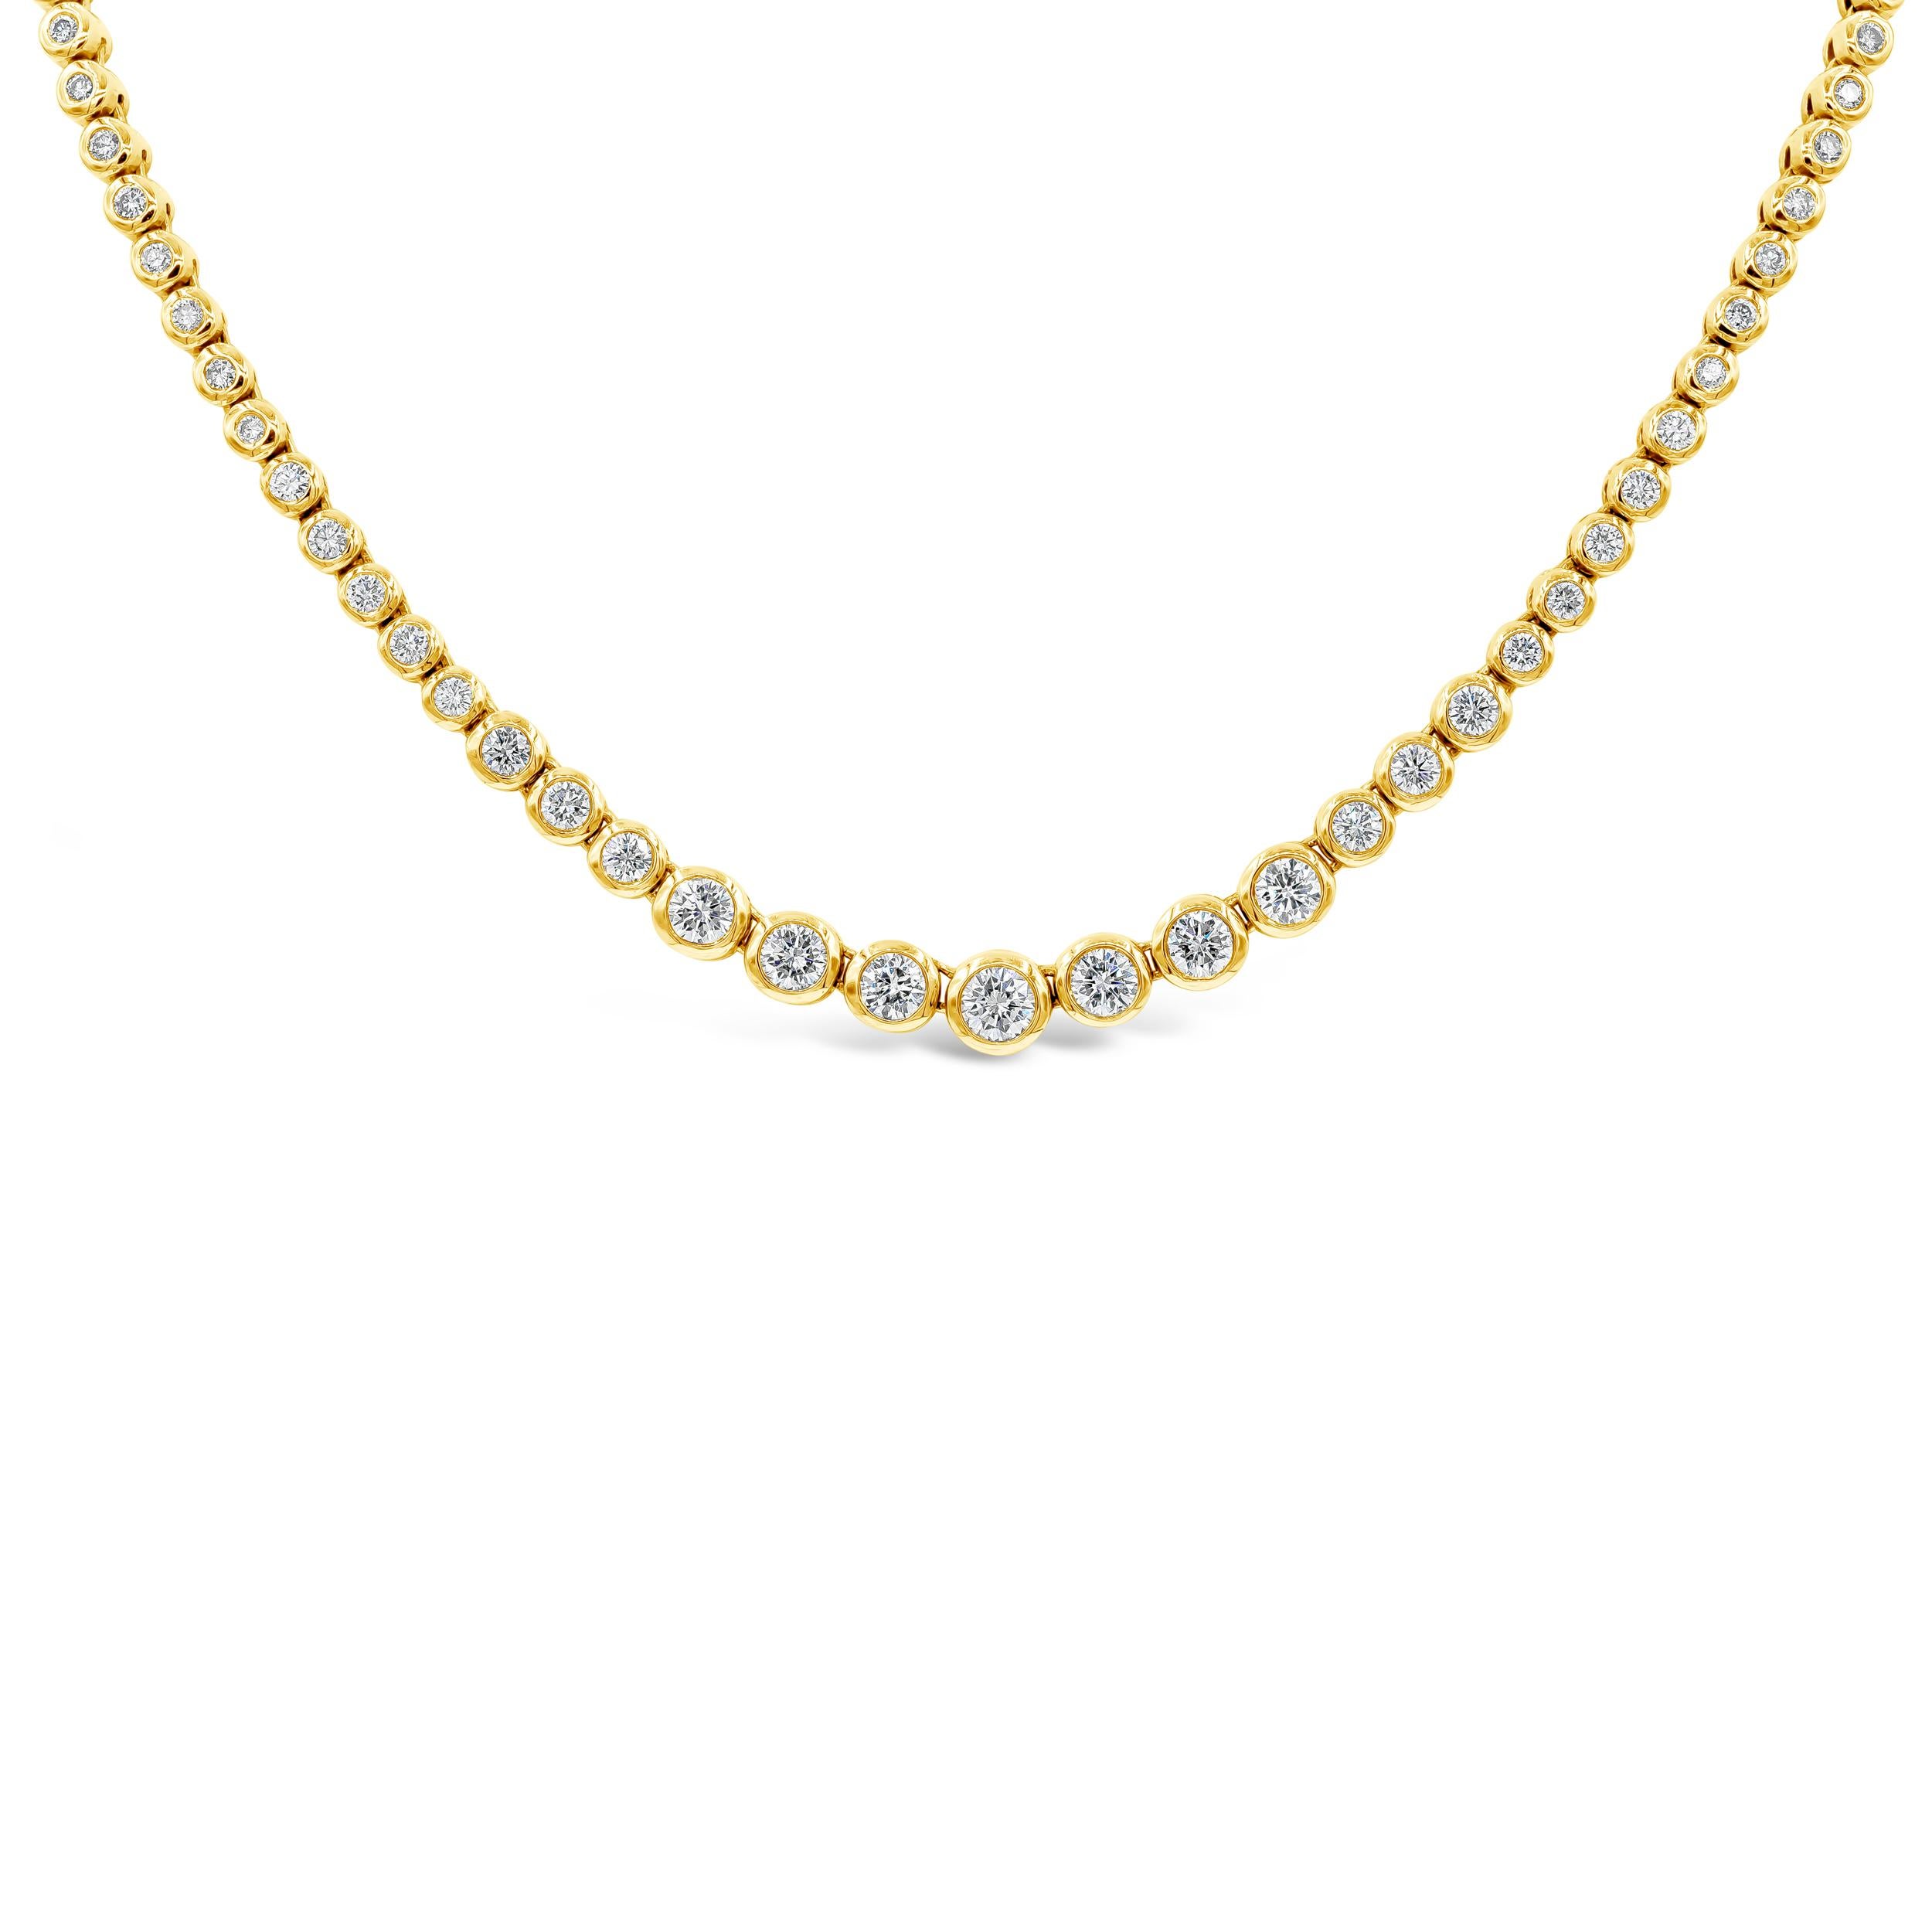 A simple riviere necklace perfect for everyday wear. Showcases graduating round brilliant diamonds elegantly set in a bezel mounting made in 14 karat yellow gold. Diamonds weigh 7.10 carats total and are approximately F-G color, VS-SI clarity.